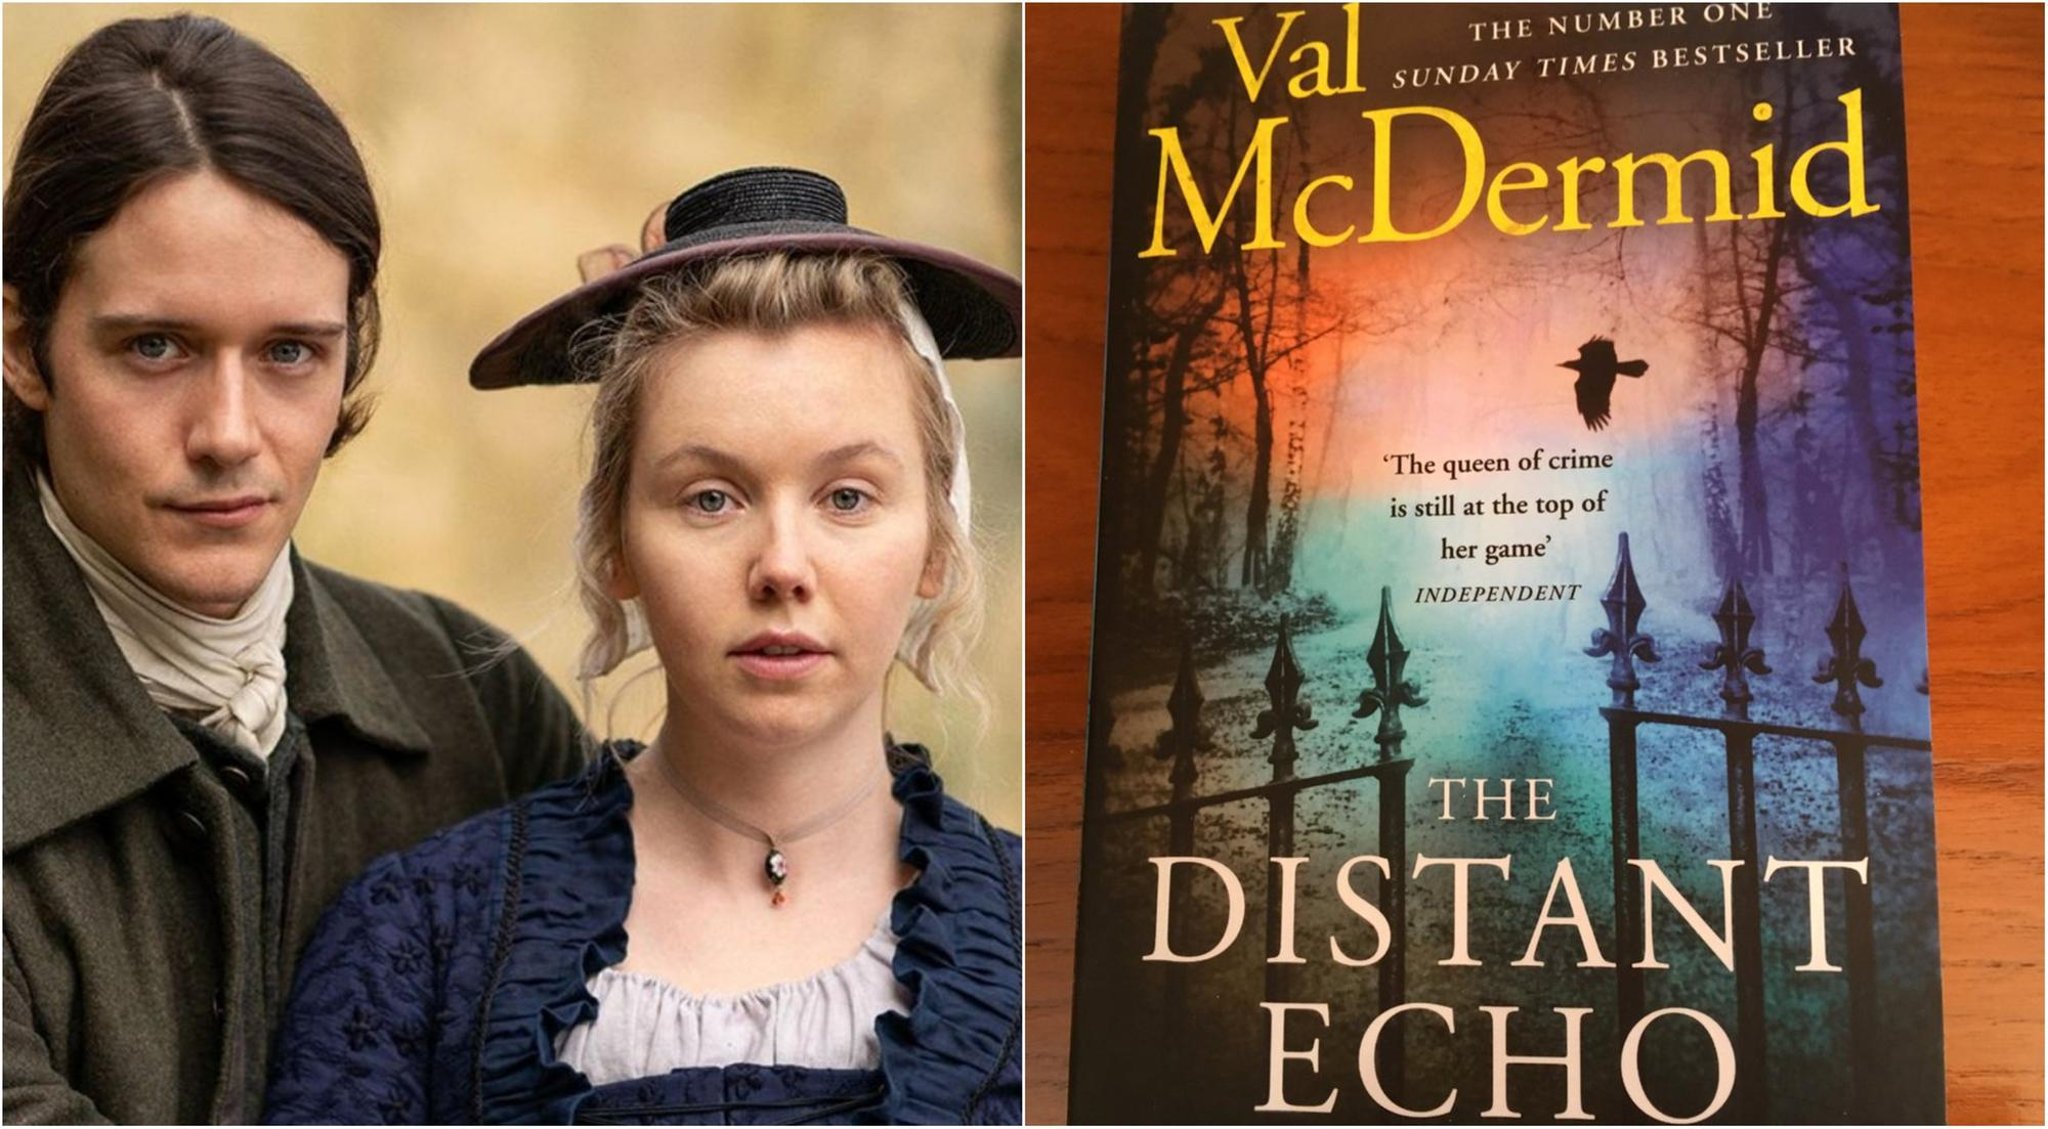 Outlander actress Lauren Lyle will play DS Karen Pirie in a TV adaptation of Val McDermid’s The Distant Echo